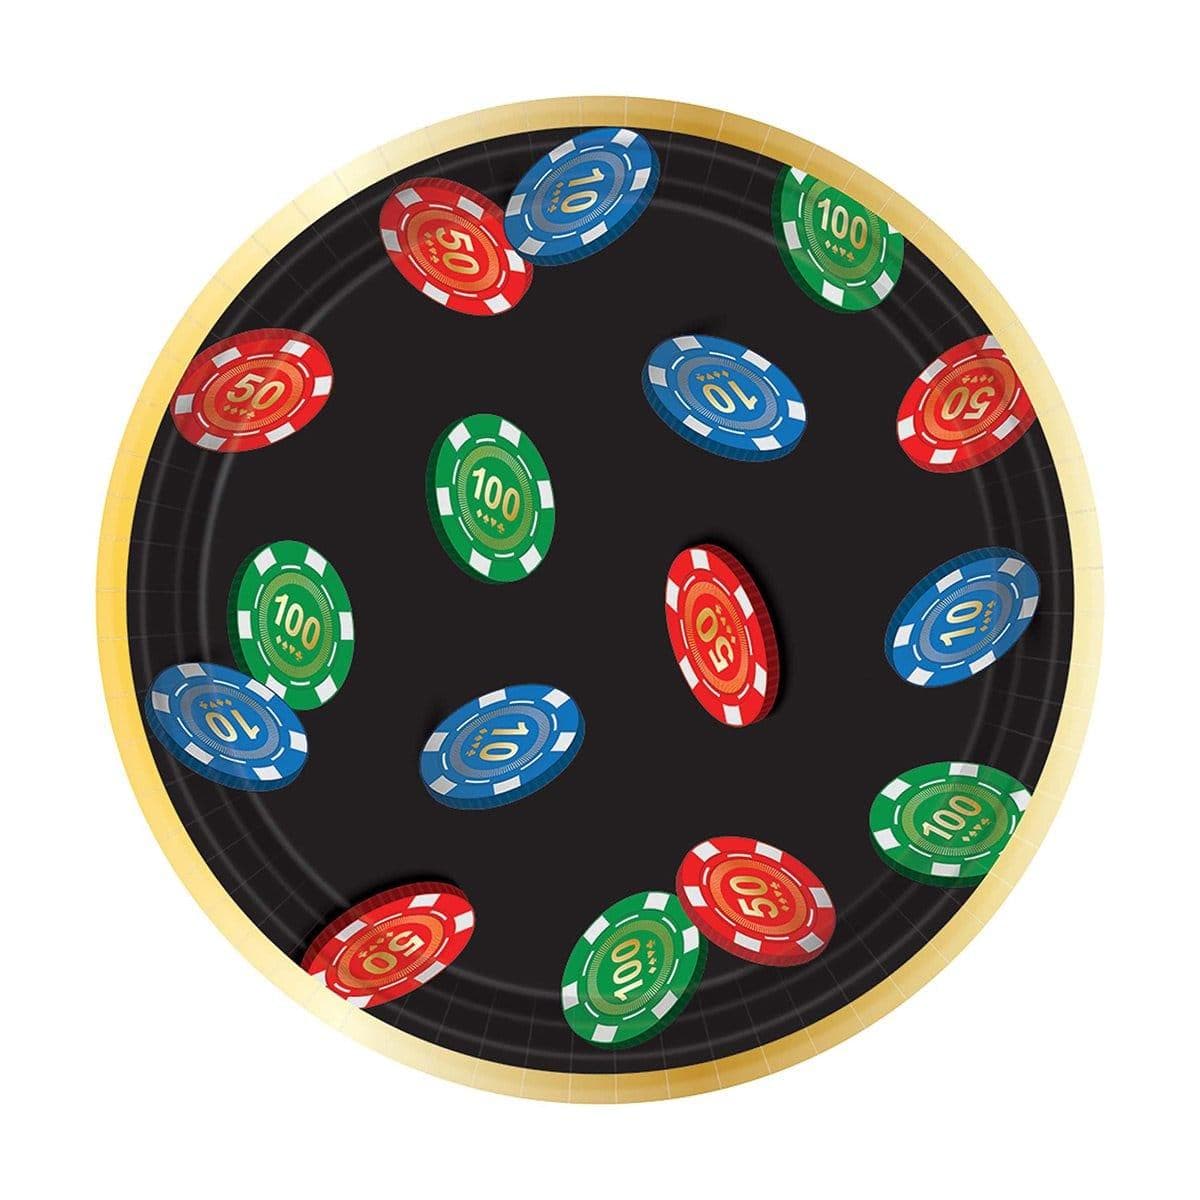 Buy Theme Party Roll The Dice Paper Plates 7 Inches, 8 per Package sold at Party Expert